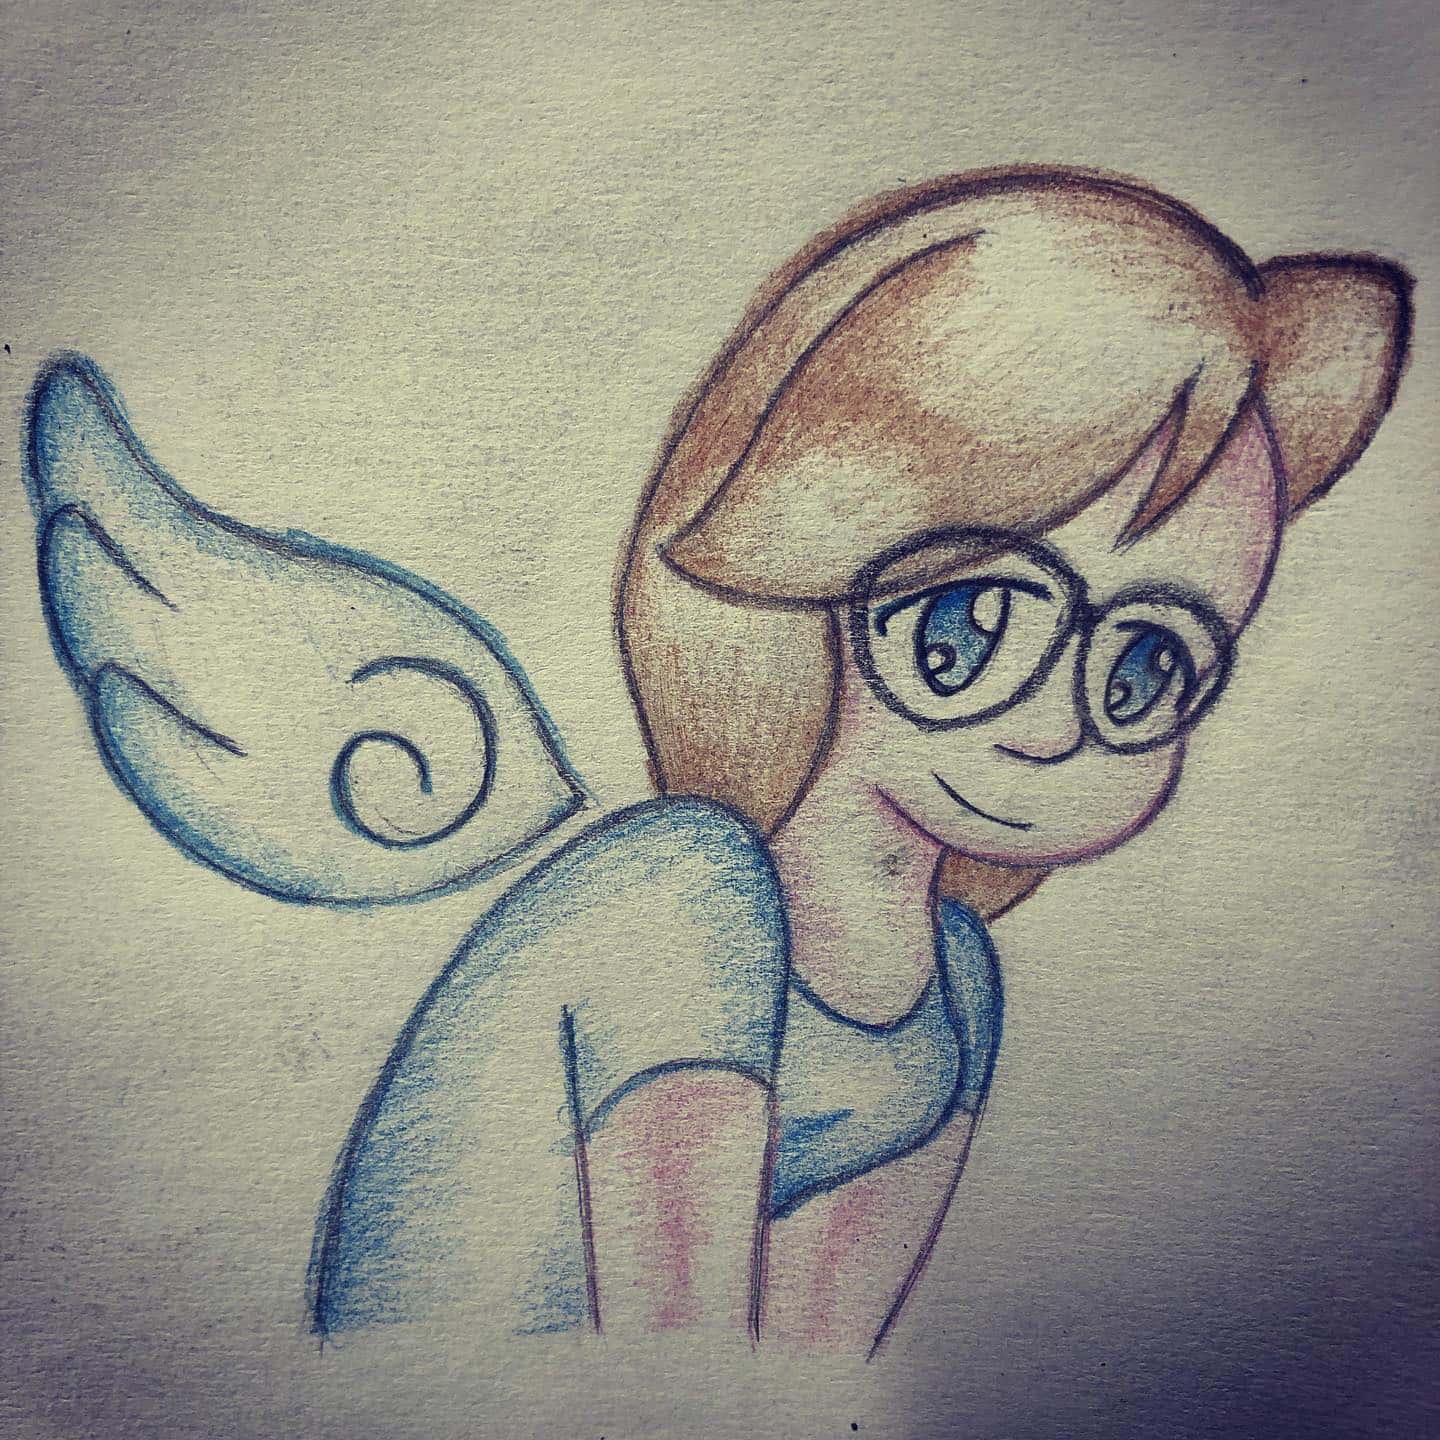 A colored pencil drawing of a woman with glasses and cartoon angel wings.